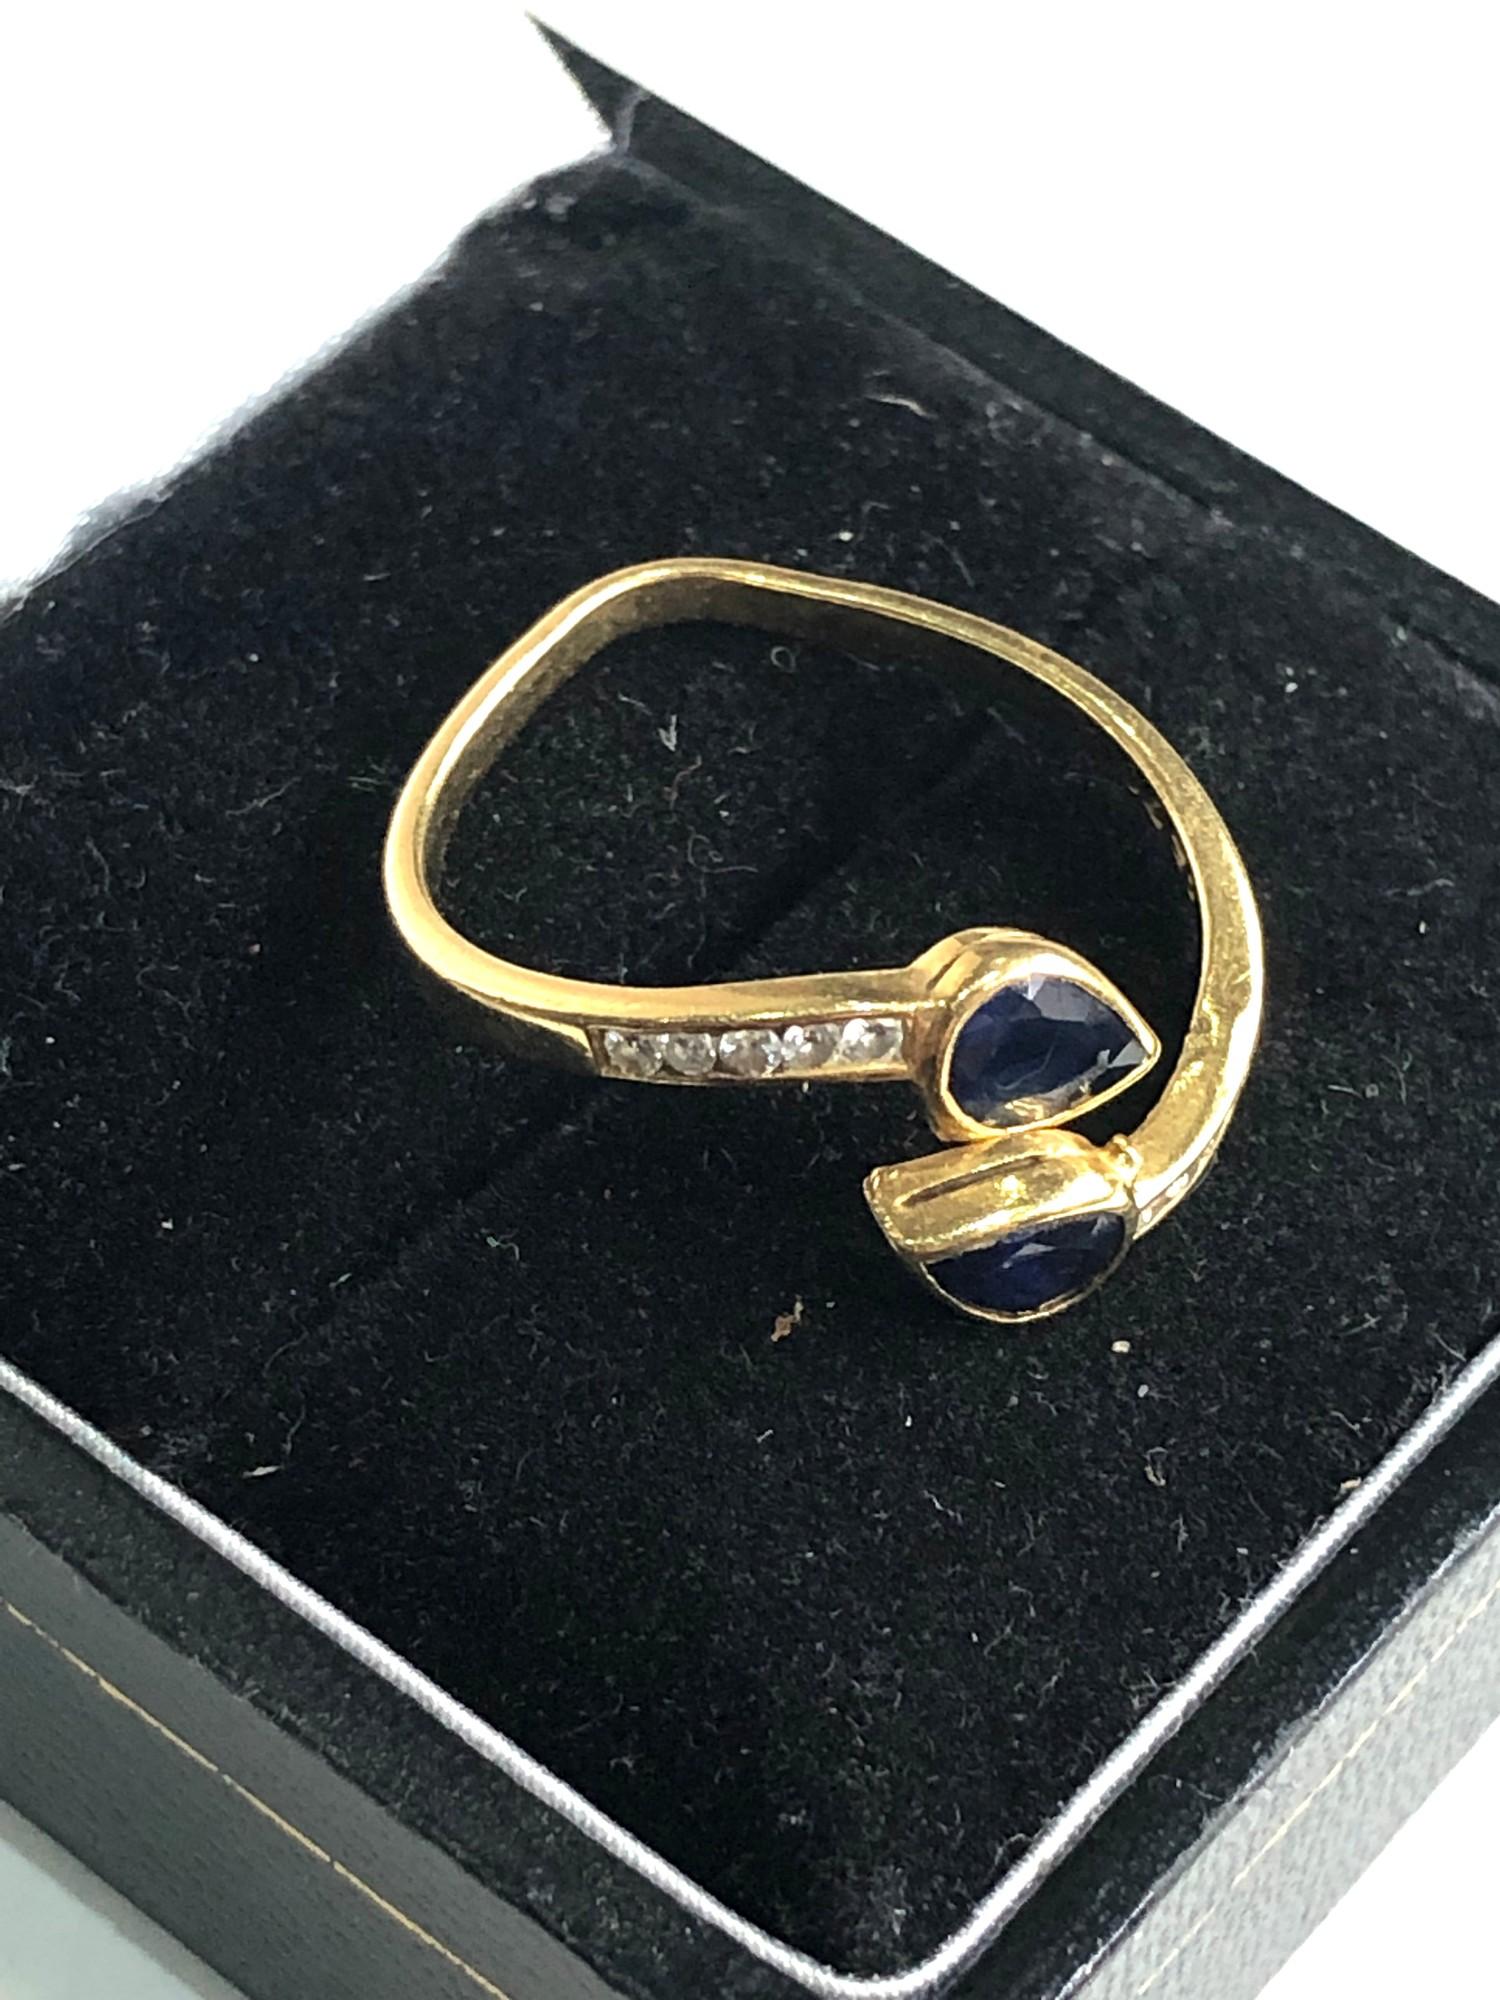 18ct gold sapphire & diamond wrap ring weight 3g - Image 3 of 4